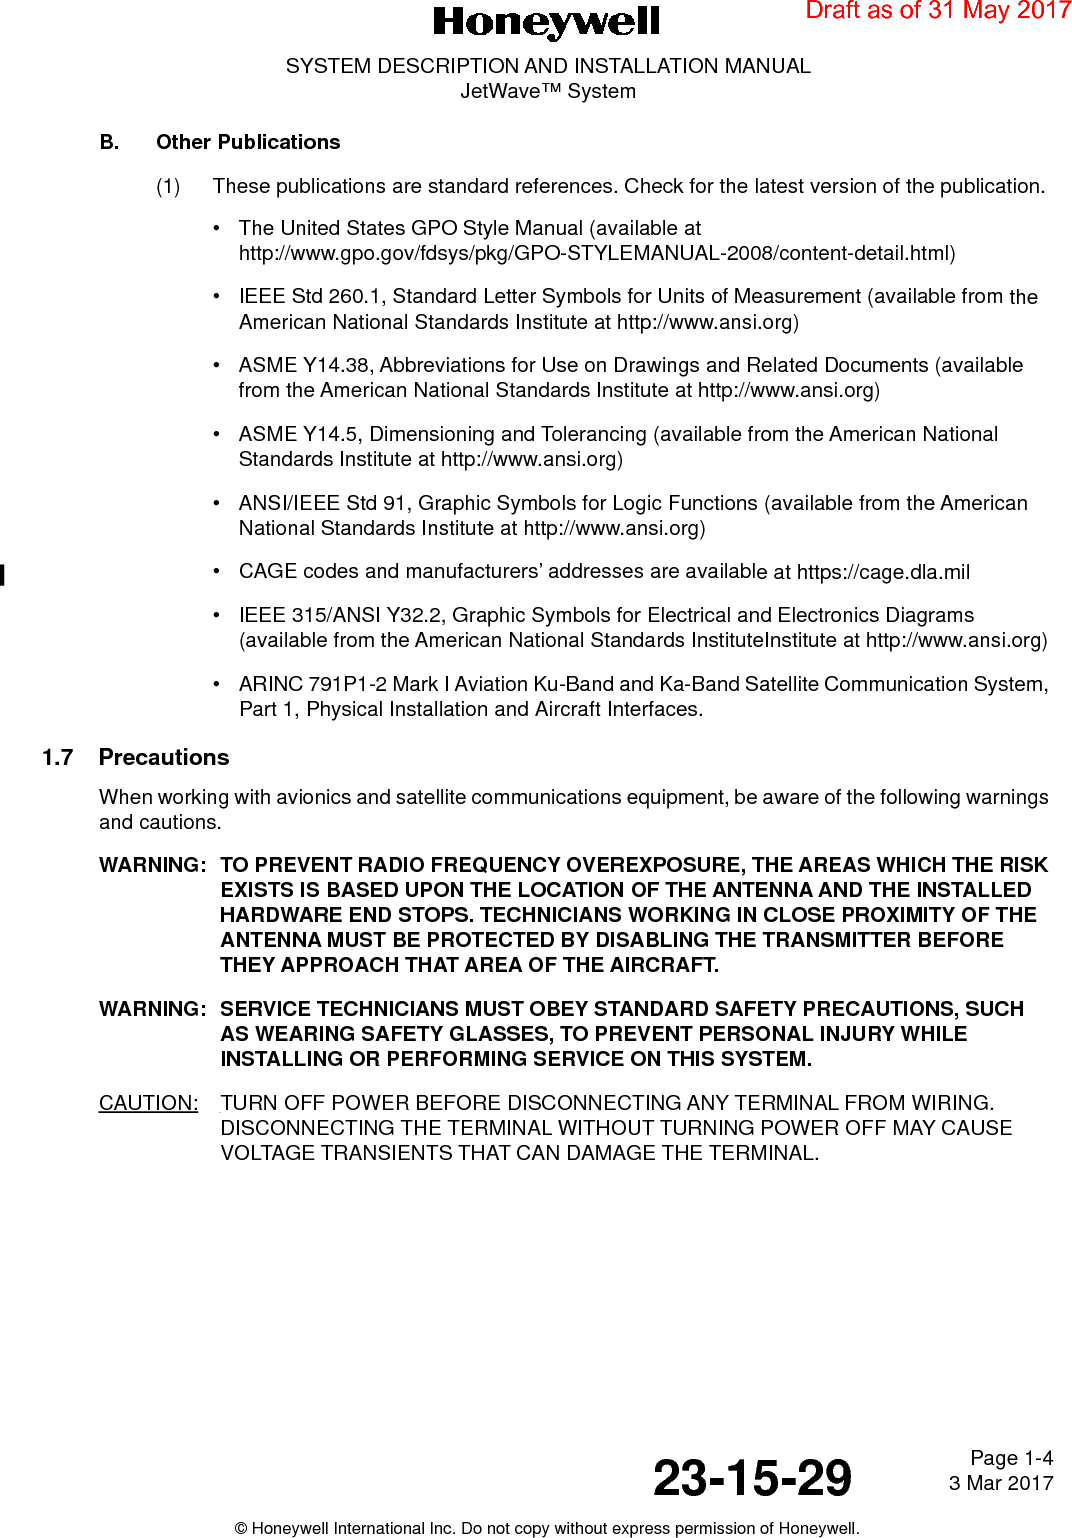 Page 1-4 3 Mar 201723-15-29SYSTEM DESCRIPTION AND INSTALLATION MANUALJetWave™ System© Honeywell International Inc. Do not copy without express permission of Honeywell.B. Other Publications(1) These publications are standard references. Check for the latest version of the publication.• The United States GPO Style Manual (available at http://www.gpo.gov/fdsys/pkg/GPO-STYLEMANUAL-2008/content-detail.html)• IEEE Std 260.1, Standard Letter Symbols for Units of Measurement (available from the American National Standards Institute at http://www.ansi.org)• ASME Y14.38, Abbreviations for Use on Drawings and Related Documents (available from the American National Standards Institute at http://www.ansi.org)• ASME Y14.5, Dimensioning and Tolerancing (available from the American National Standards Institute at http://www.ansi.org)• ANSI/IEEE Std 91, Graphic Symbols for Logic Functions (available from the American National Standards Institute at http://www.ansi.org)• CAGE codes and manufacturers’ addresses are available at https://cage.dla.mil• IEEE 315/ANSI Y32.2, Graphic Symbols for Electrical and Electronics Diagrams (available from the American National Standards InstituteInstitute at http://www.ansi.org)• ARINC 791P1-2 Mark I Aviation Ku-Band and Ka-Band Satellite Communication System, Part 1, Physical Installation and Aircraft Interfaces.1.7 PrecautionsWhen working with avionics and satellite communications equipment, be aware of the following warnings and cautions.WARNING: TO PREVENT RADIO FREQUENCY OVEREXPOSURE, THE AREAS WHICH THE RISK EXISTS IS BASED UPON THE LOCATION OF THE ANTENNA AND THE INSTALLED HARDWARE END STOPS. TECHNICIANS WORKING IN CLOSE PROXIMITY OF THE ANTENNA MUST BE PROTECTED BY DISABLING THE TRANSMITTER BEFORE THEY APPROACH THAT AREA OF THE AIRCRAFT.WARNING: SERVICE TECHNICIANS MUST OBEY STANDARD SAFETY PRECAUTIONS, SUCH AS WEARING SAFETY GLASSES, TO PREVENT PERSONAL INJURY WHILE INSTALLING OR PERFORMING SERVICE ON THIS SYSTEM.CAUTION: TURN OFF POWER BEFORE DISCONNECTING ANY TERMINAL FROM WIRING. DISCONNECTING THE TERMINAL WITHOUT TURNING POWER OFF MAY CAUSE VOLTAGE TRANSIENTS THAT CAN DAMAGE THE TERMINAL.Draft as of 31 May 2017